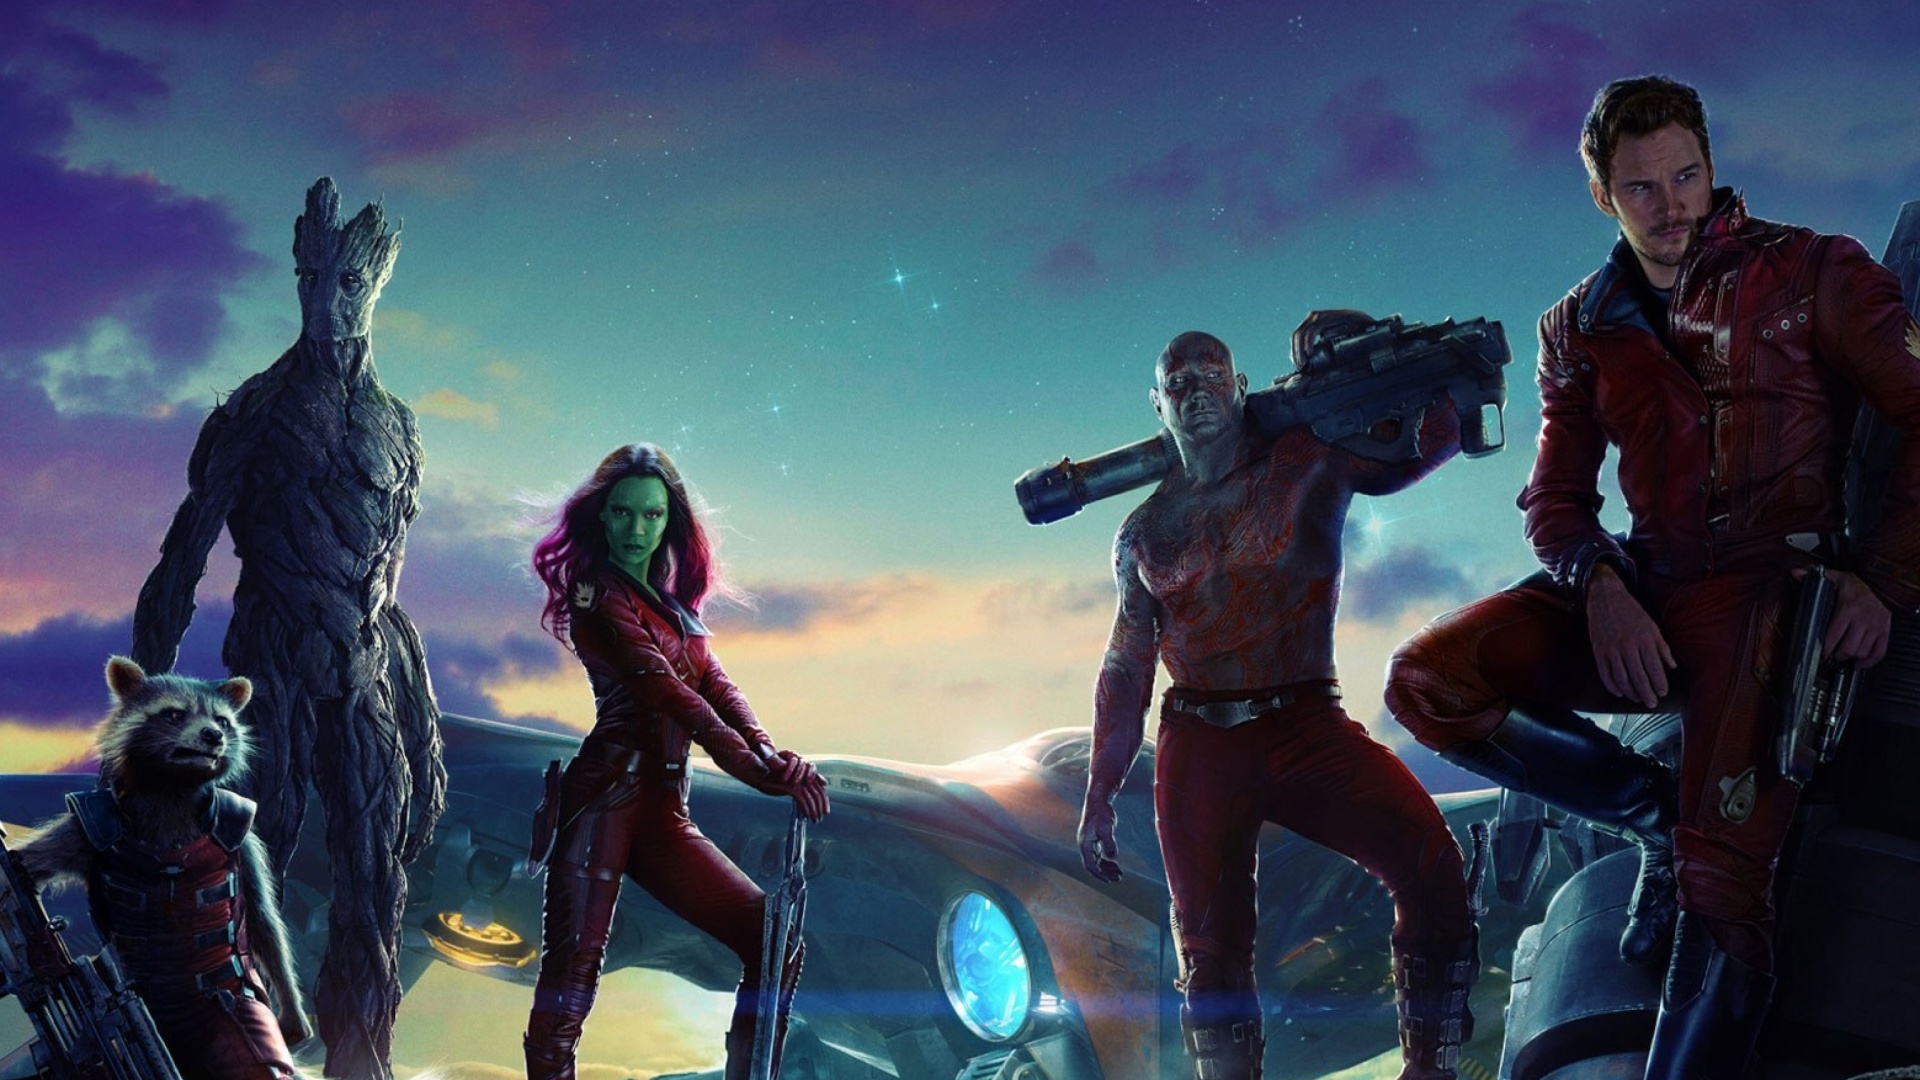 Guardians of the Galaxy wallpaper 1920x1080